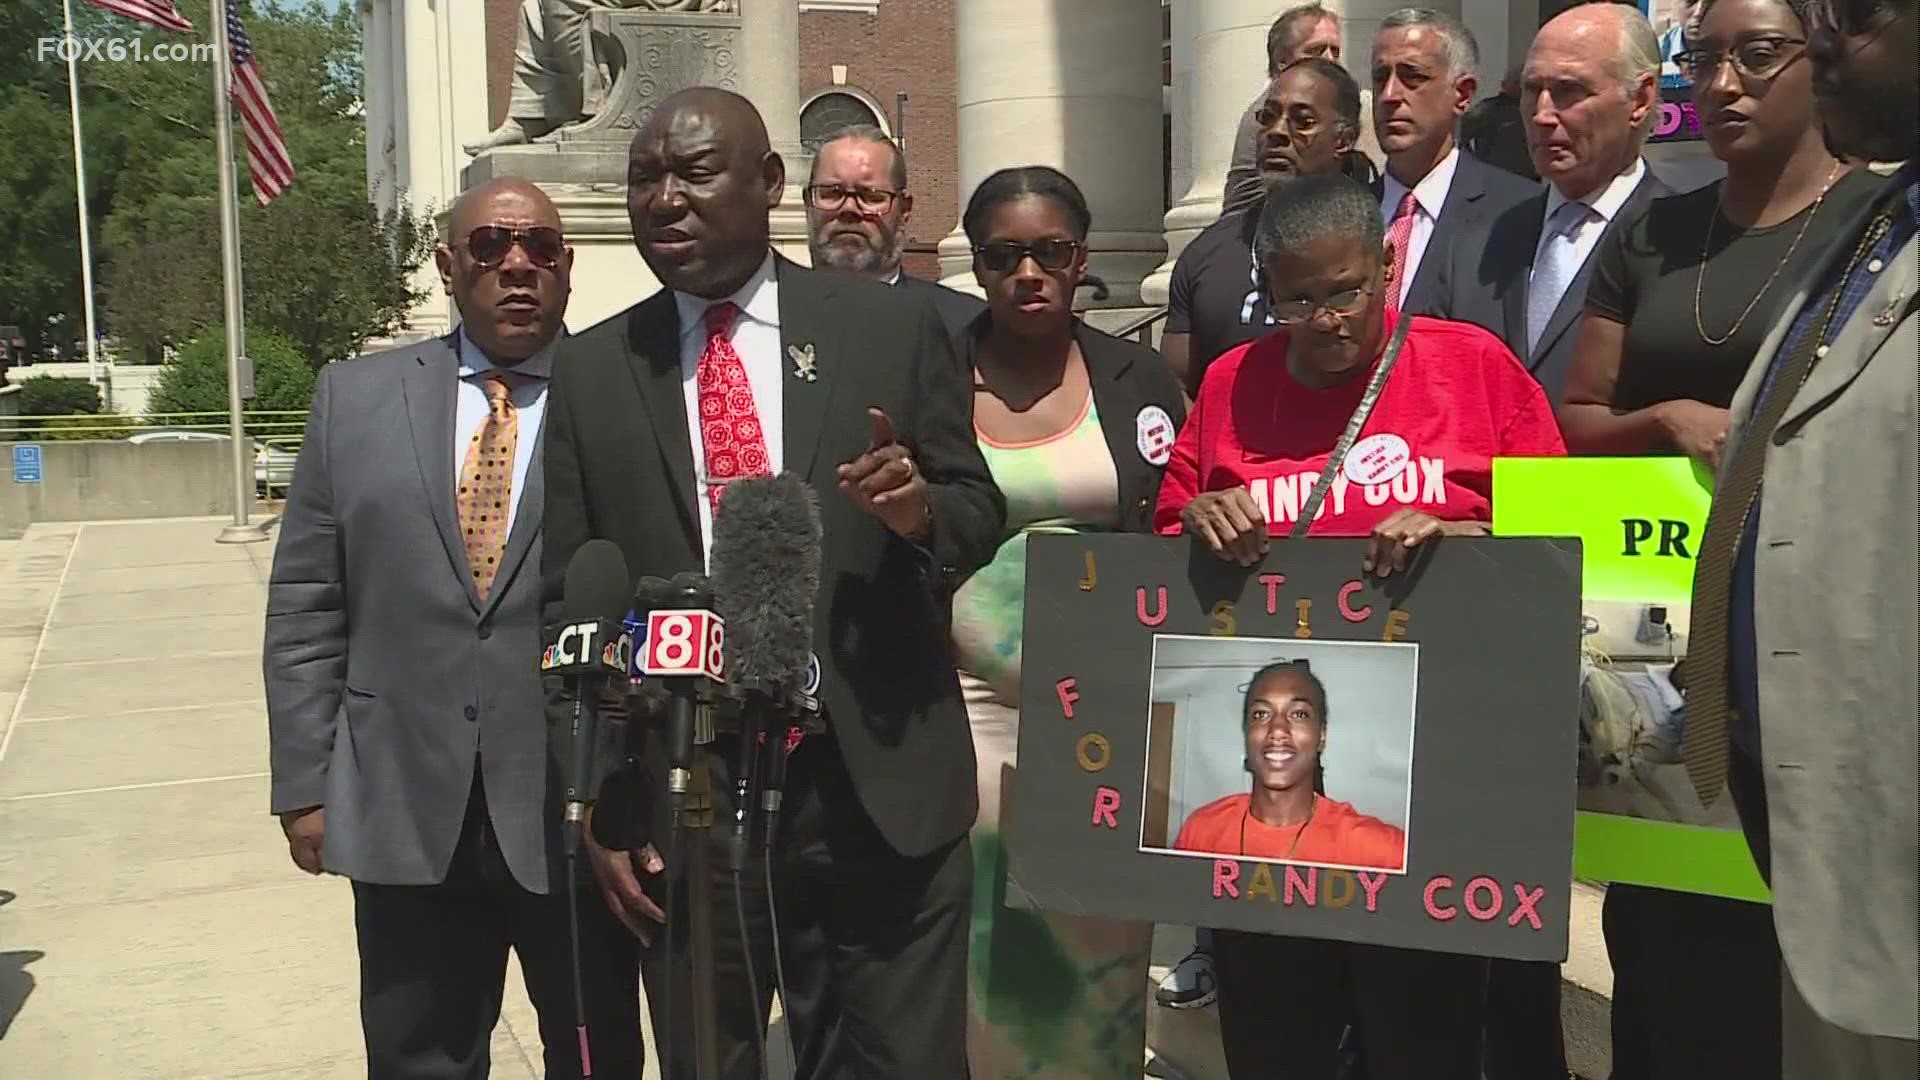 Cox's mother, two sisters and civil rights attorney Ben Crump argued that Cox's constitutional rights were violated in a press conference on Friday.